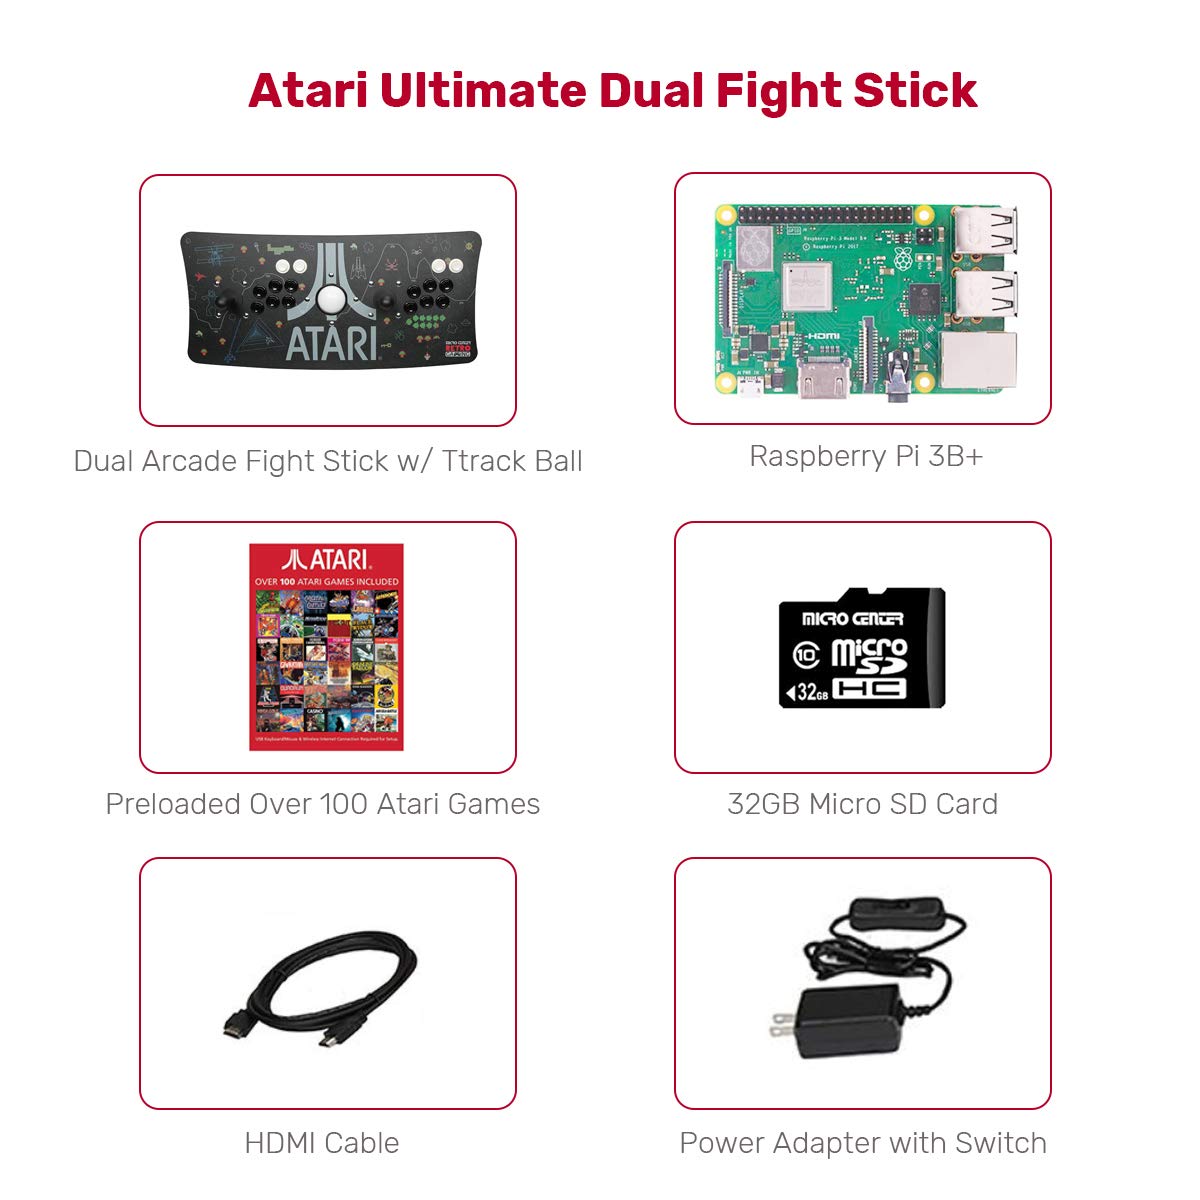 Atari Ultimate Arcade Fightstick USB Dual Joystick with Trackball 2 Player Game Controller Powered by Raspberry Pi 3B+ 1GB RAM 32GB Micro SD Card Preloaded Over 100 Classic Atari Games